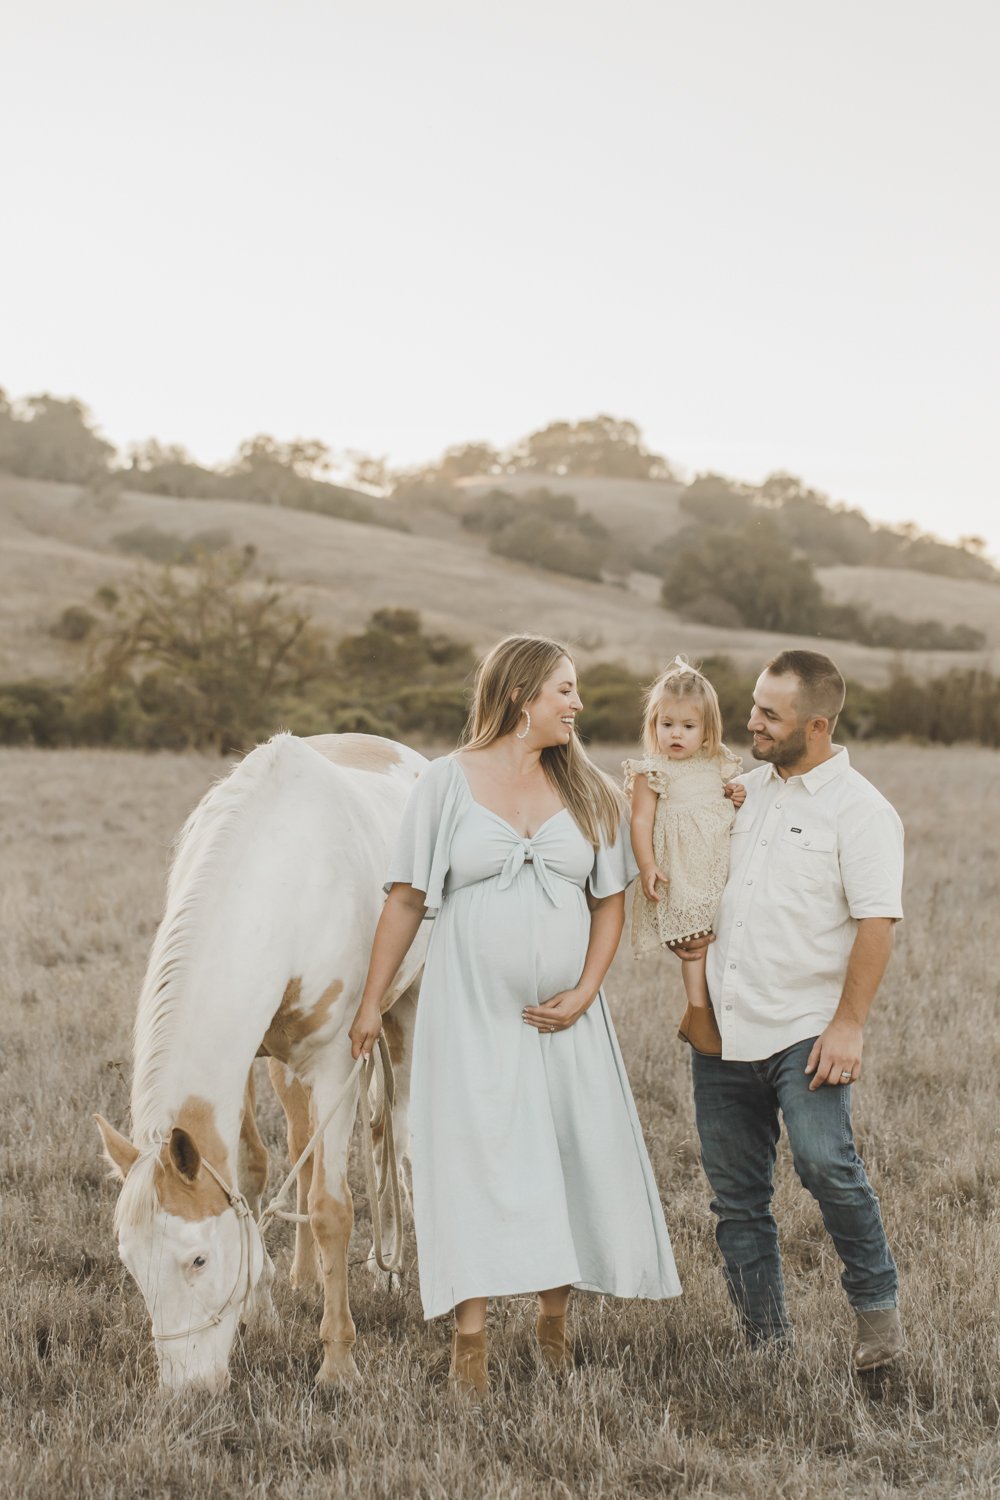 San Jose Maternity Photography Session with a Beautiful Horse